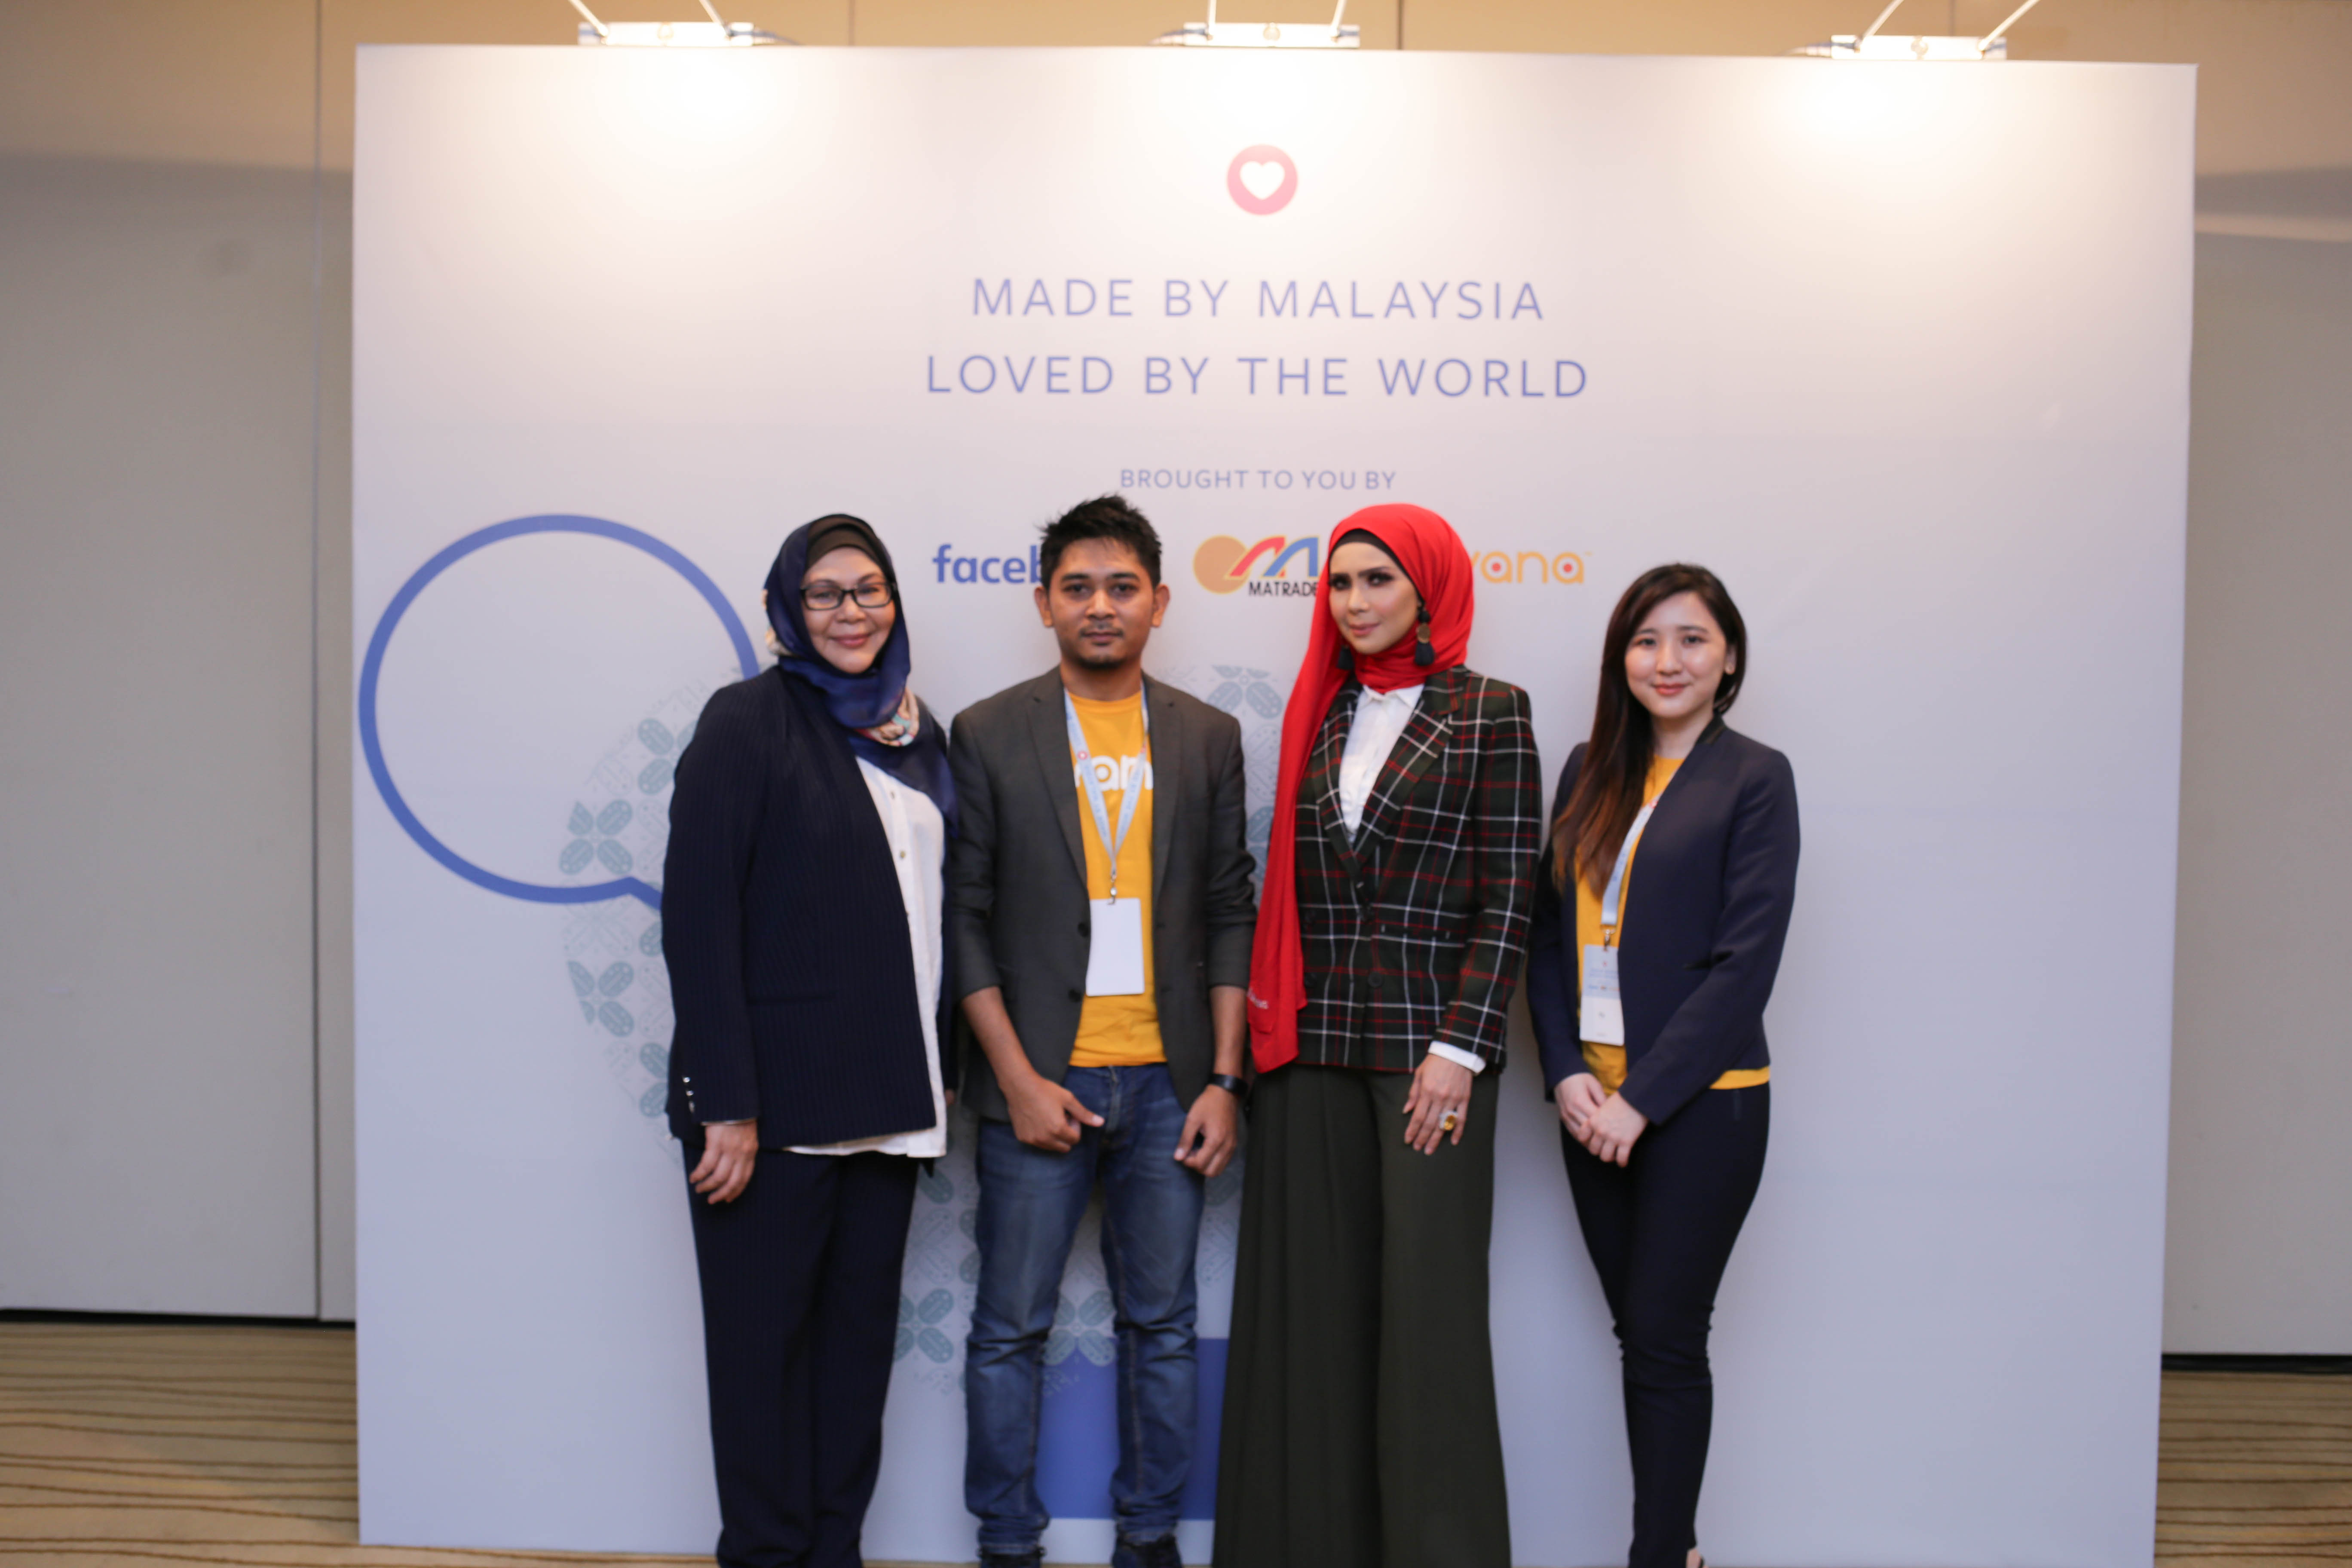 From left – Erma Fatima, Luqman Adris (CEO & Founder of Avana), Che Ta and Ms. Yien Yee (Chief Marketing Officer & Cofounder of Avana)